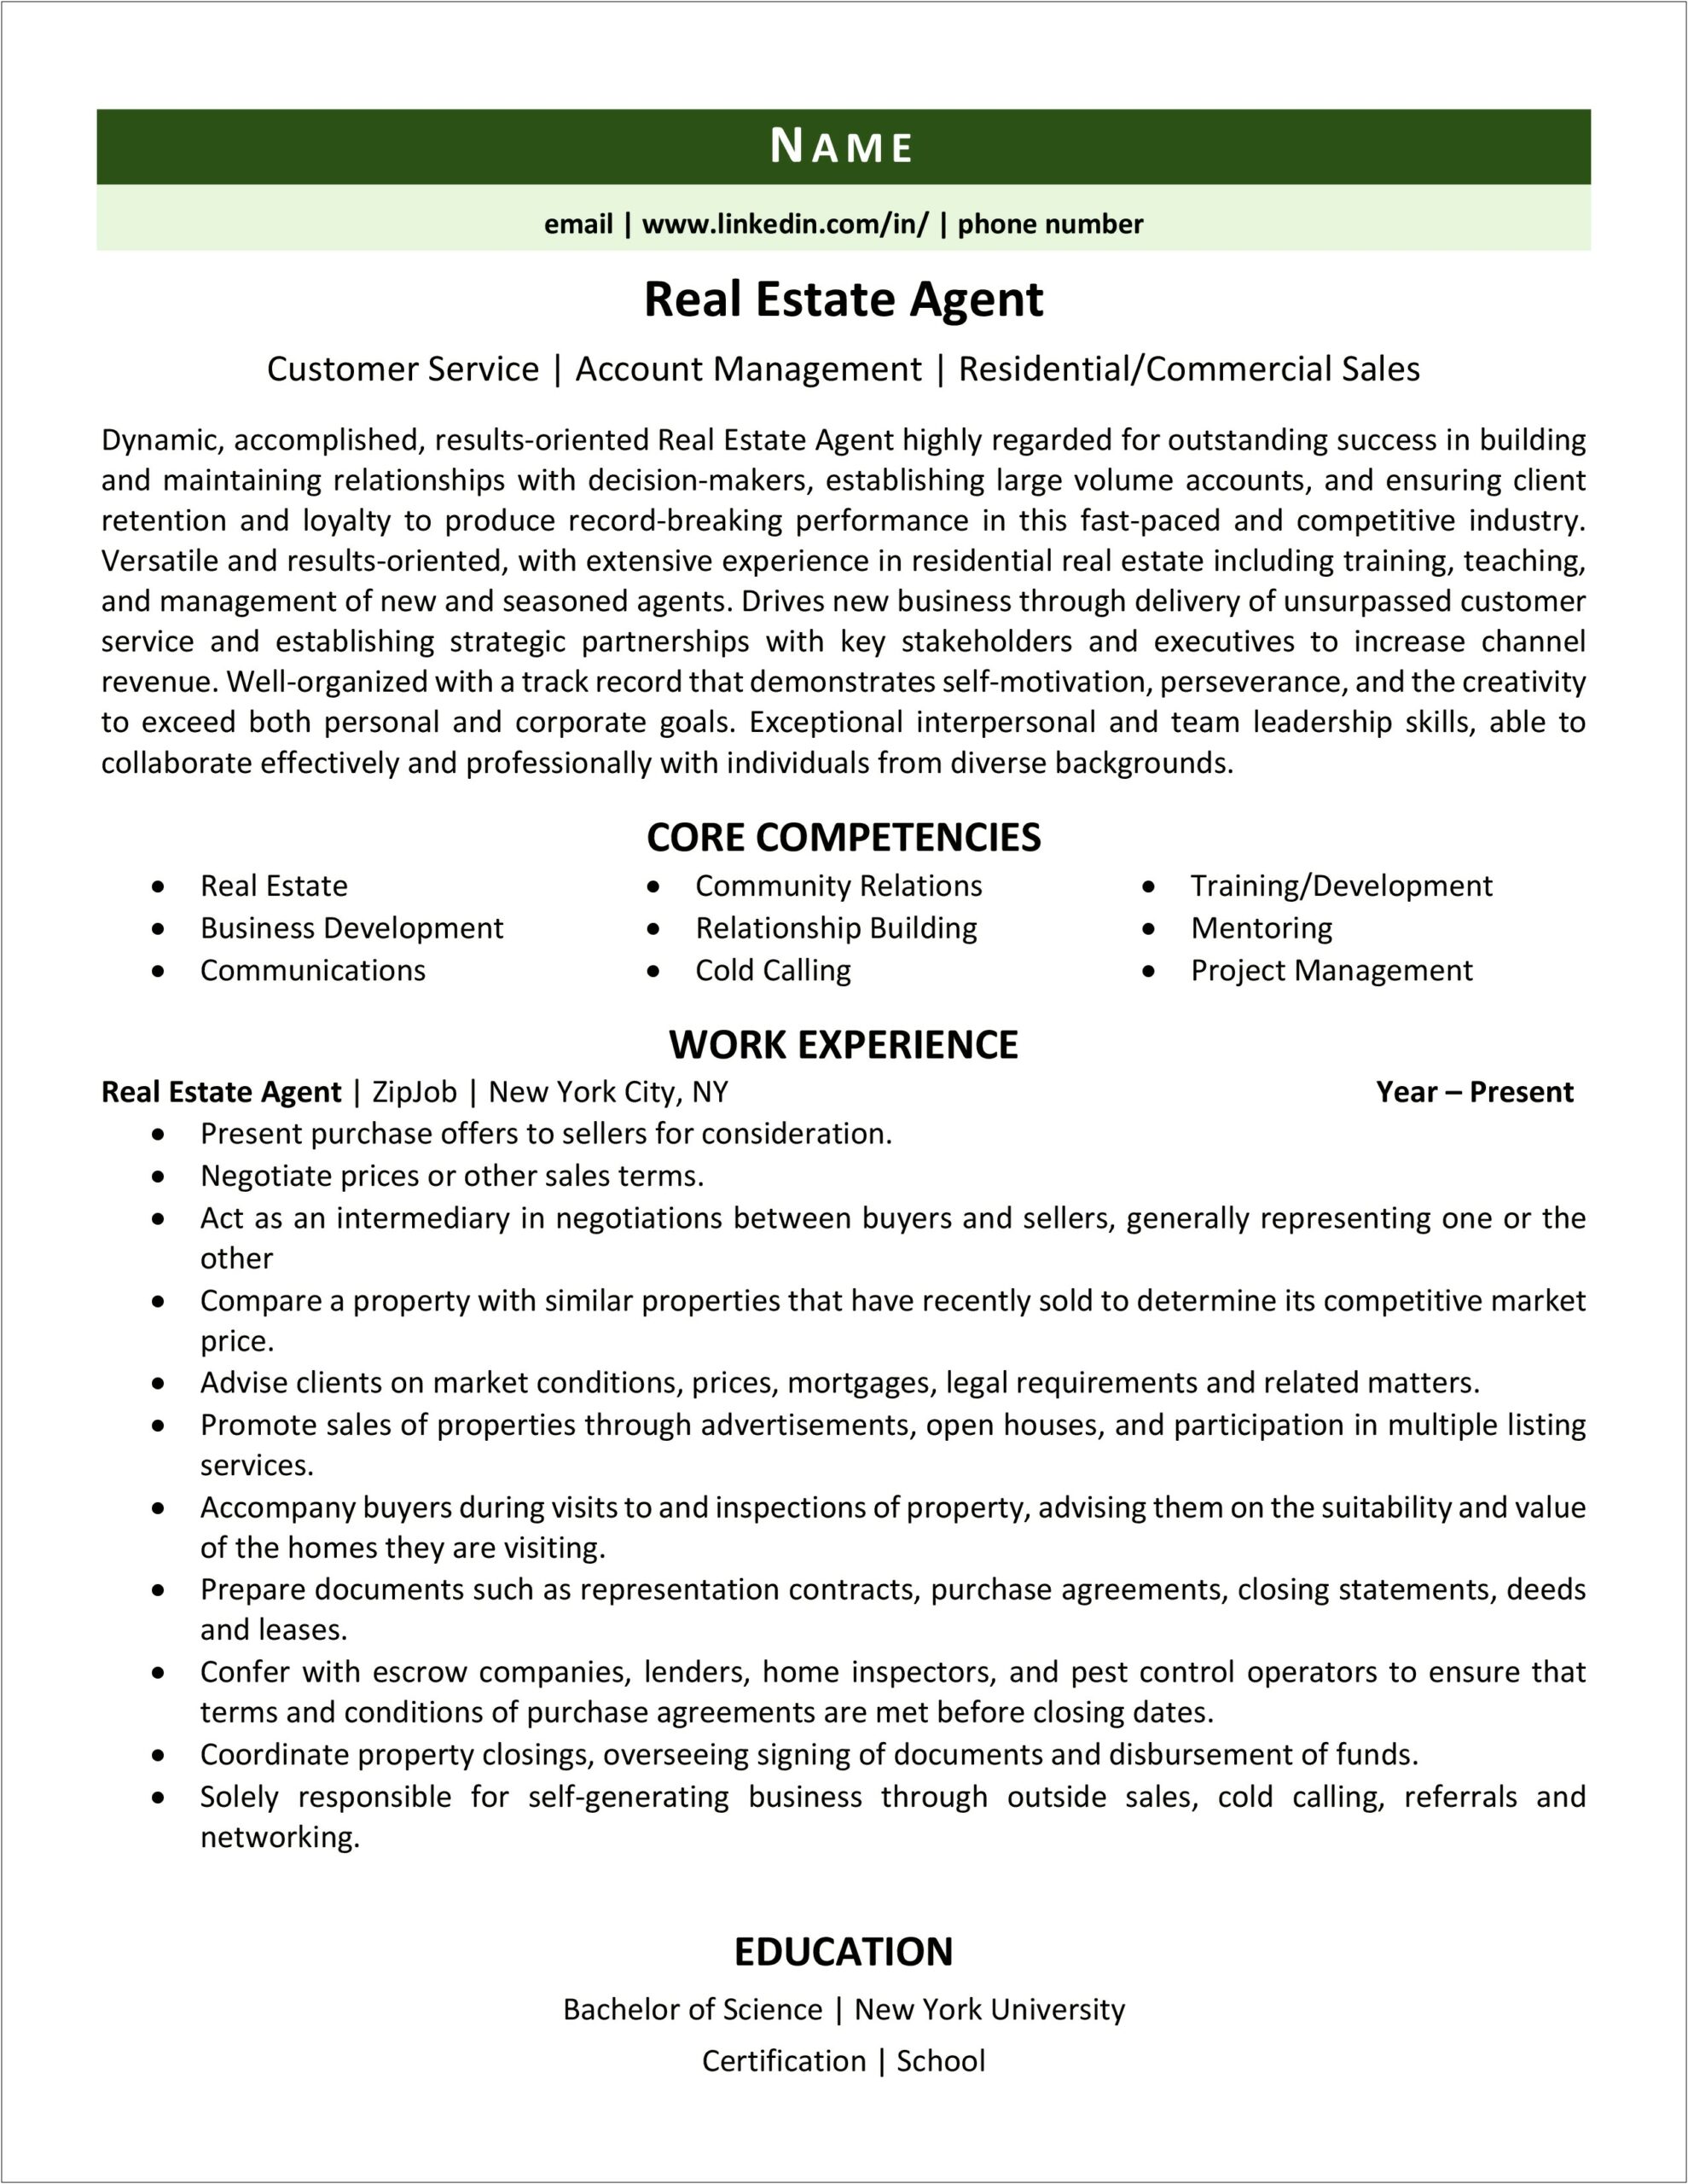 Summary For Resume For Real Estate